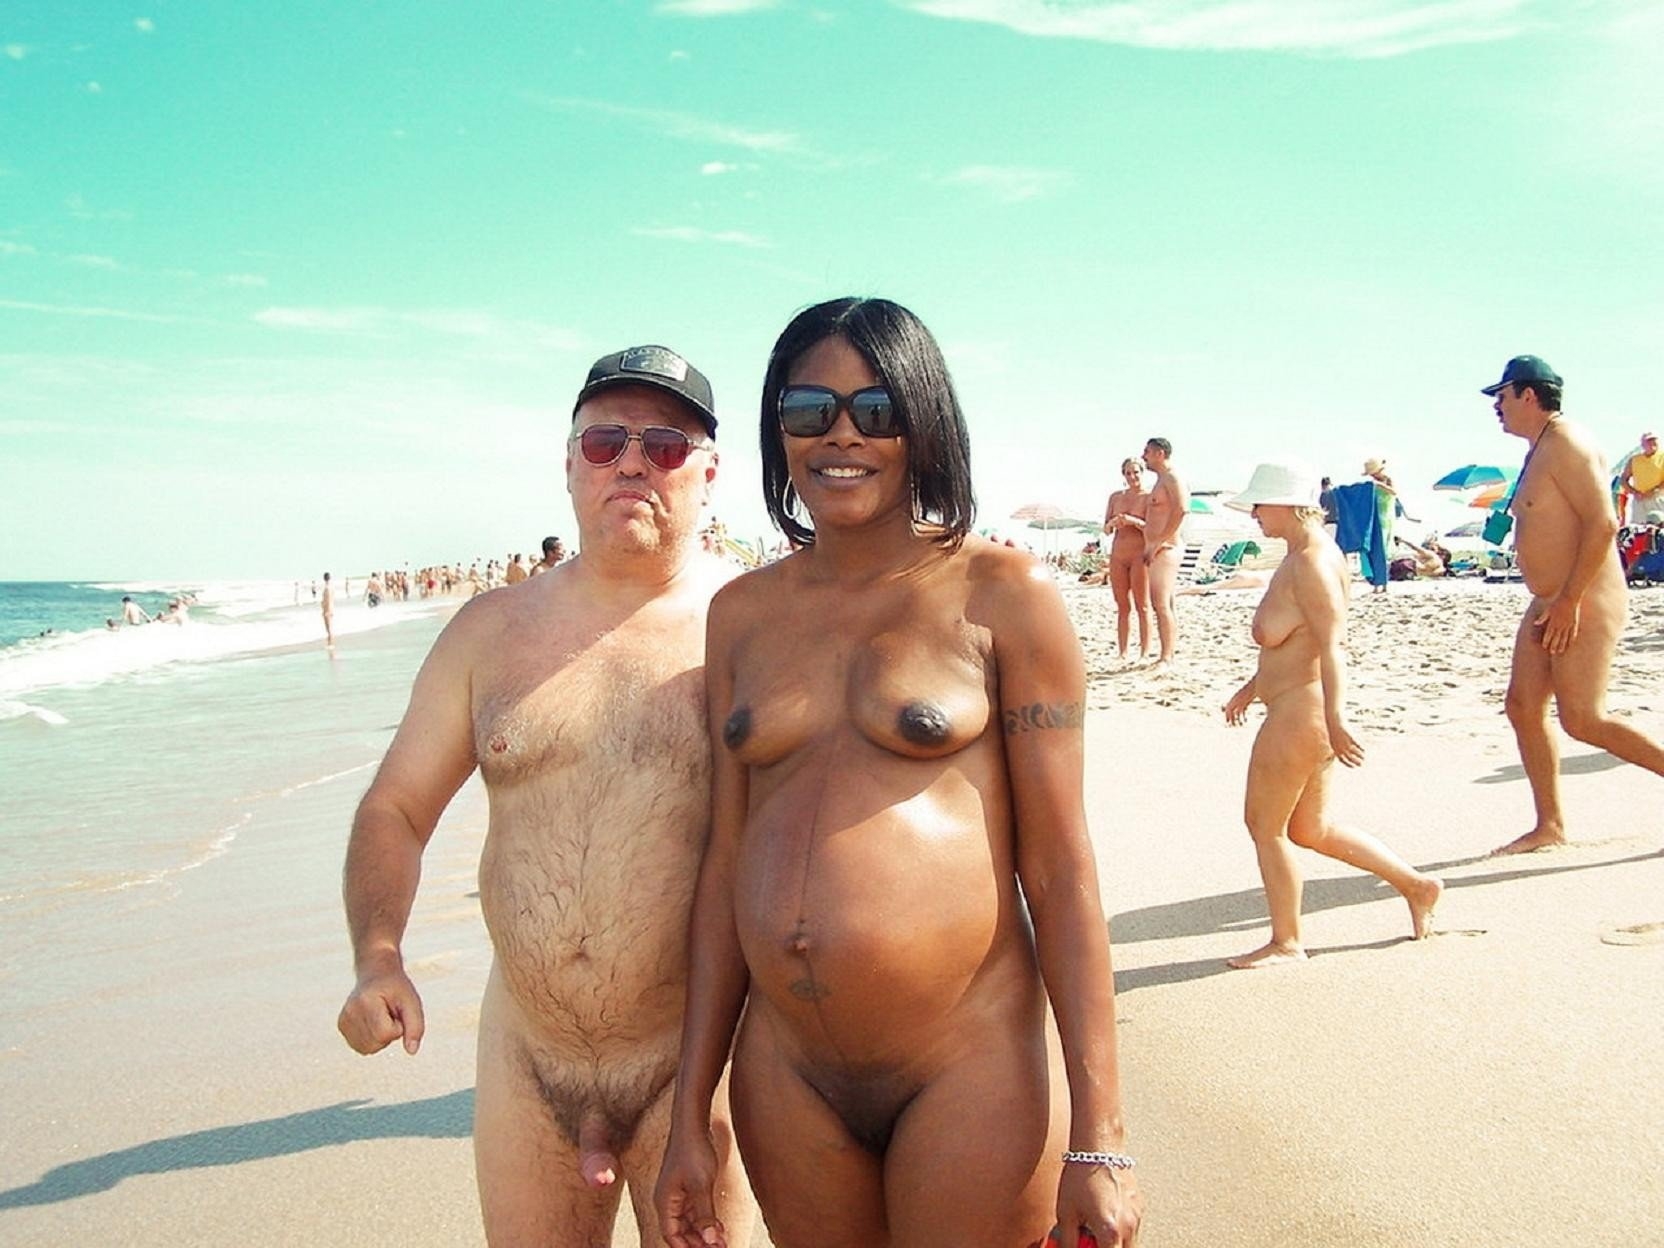 Caught nude beach and tricked images